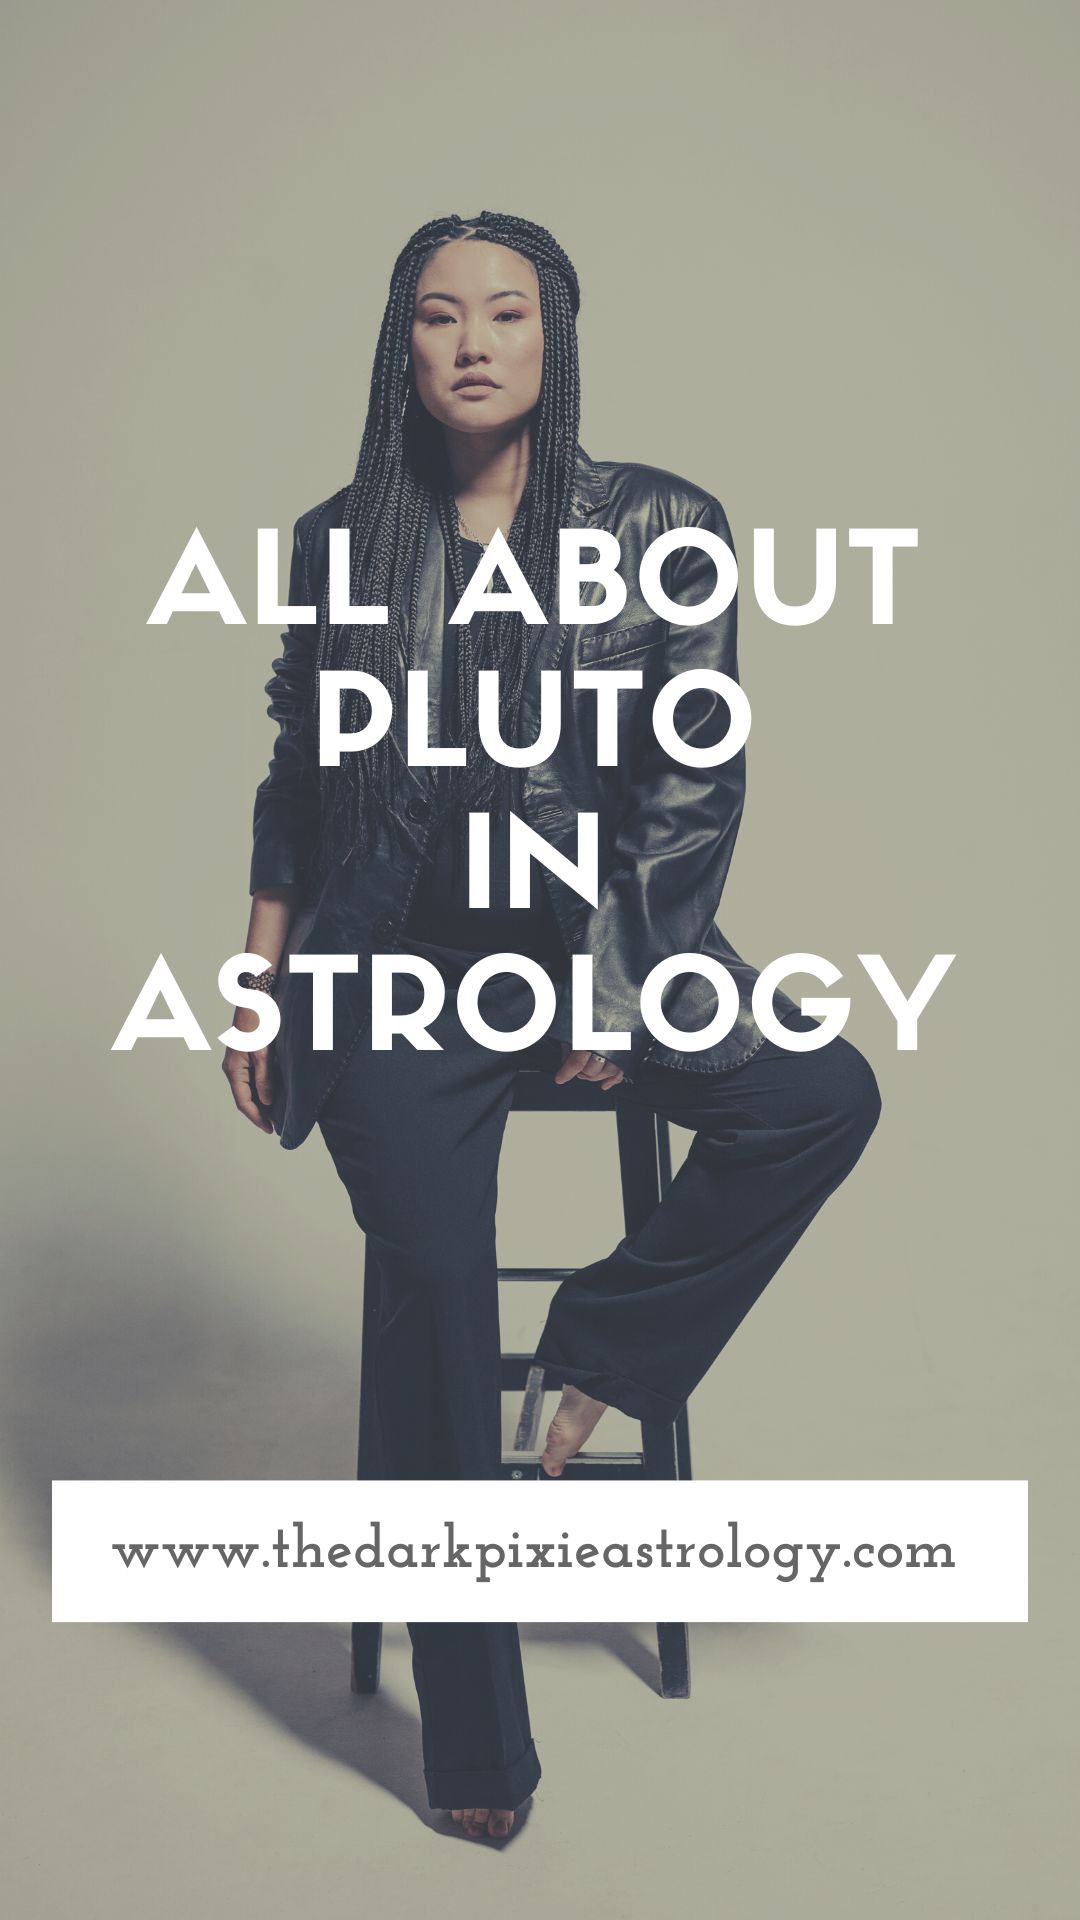 All About Pluto in Astrology - The Dark Pixie Astrology